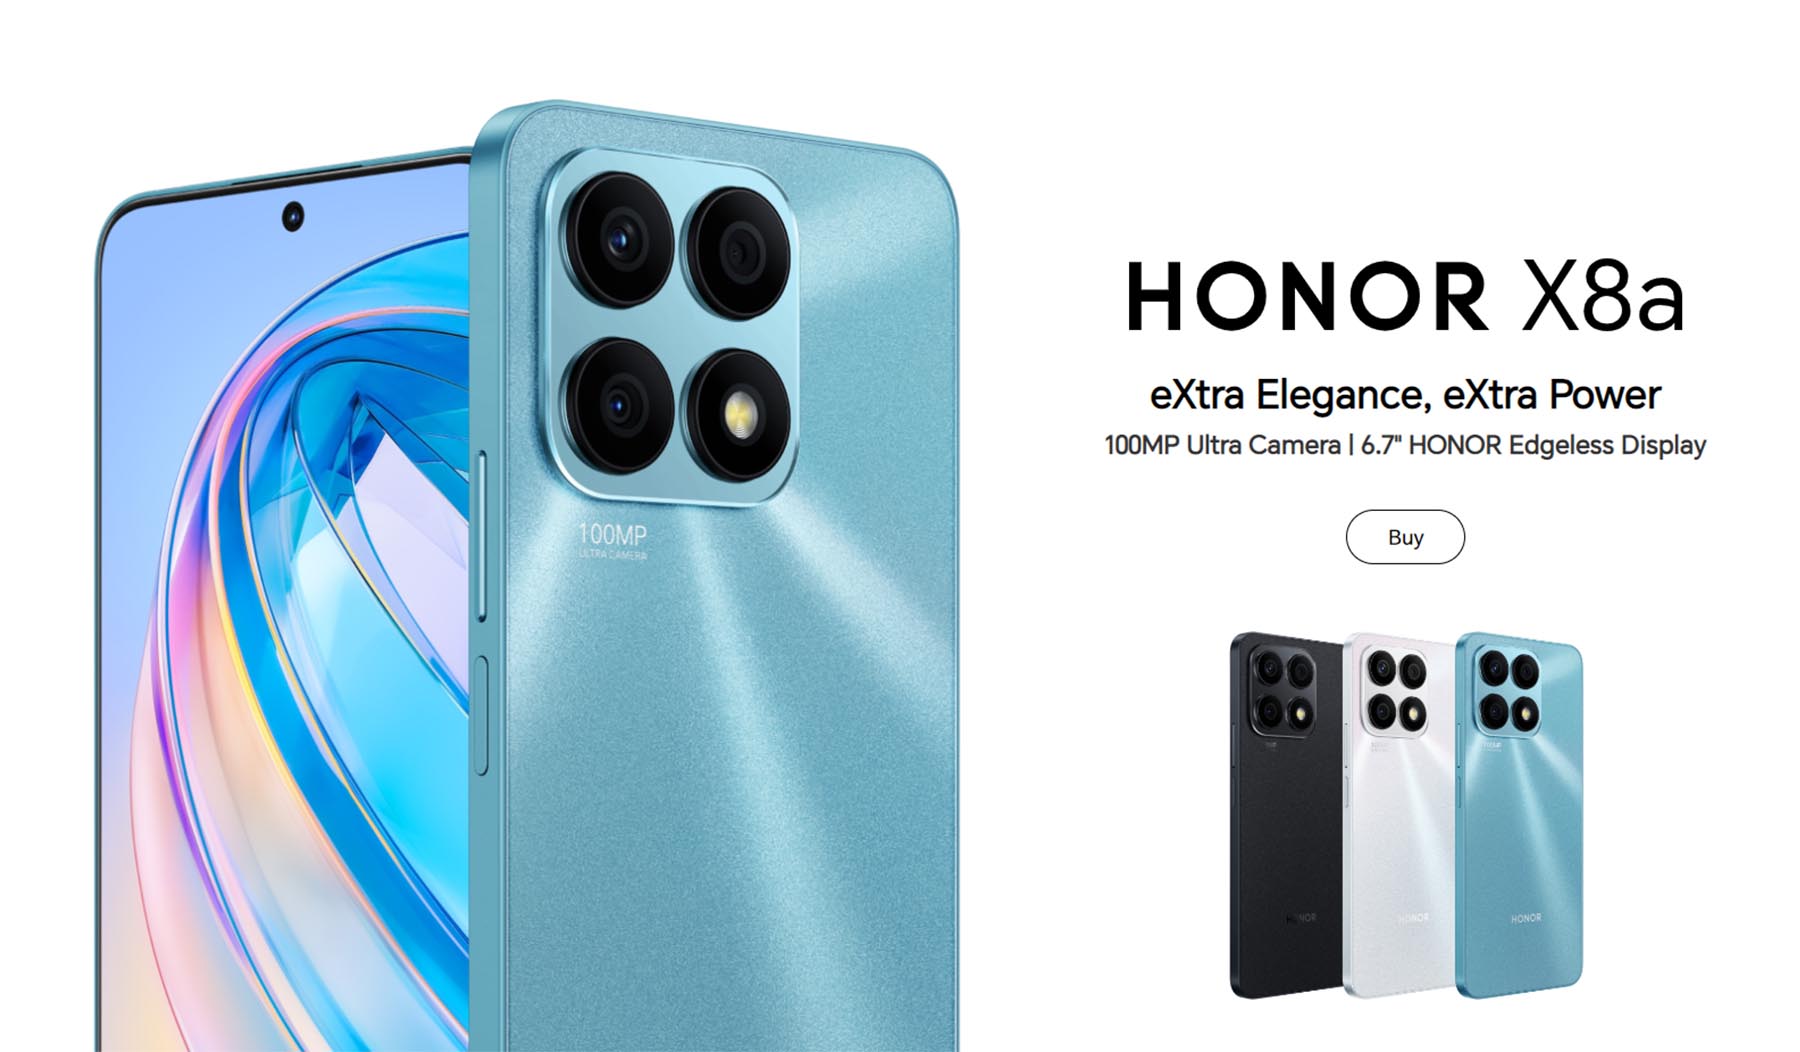 HONOR X8a Stop Pop-up Ads